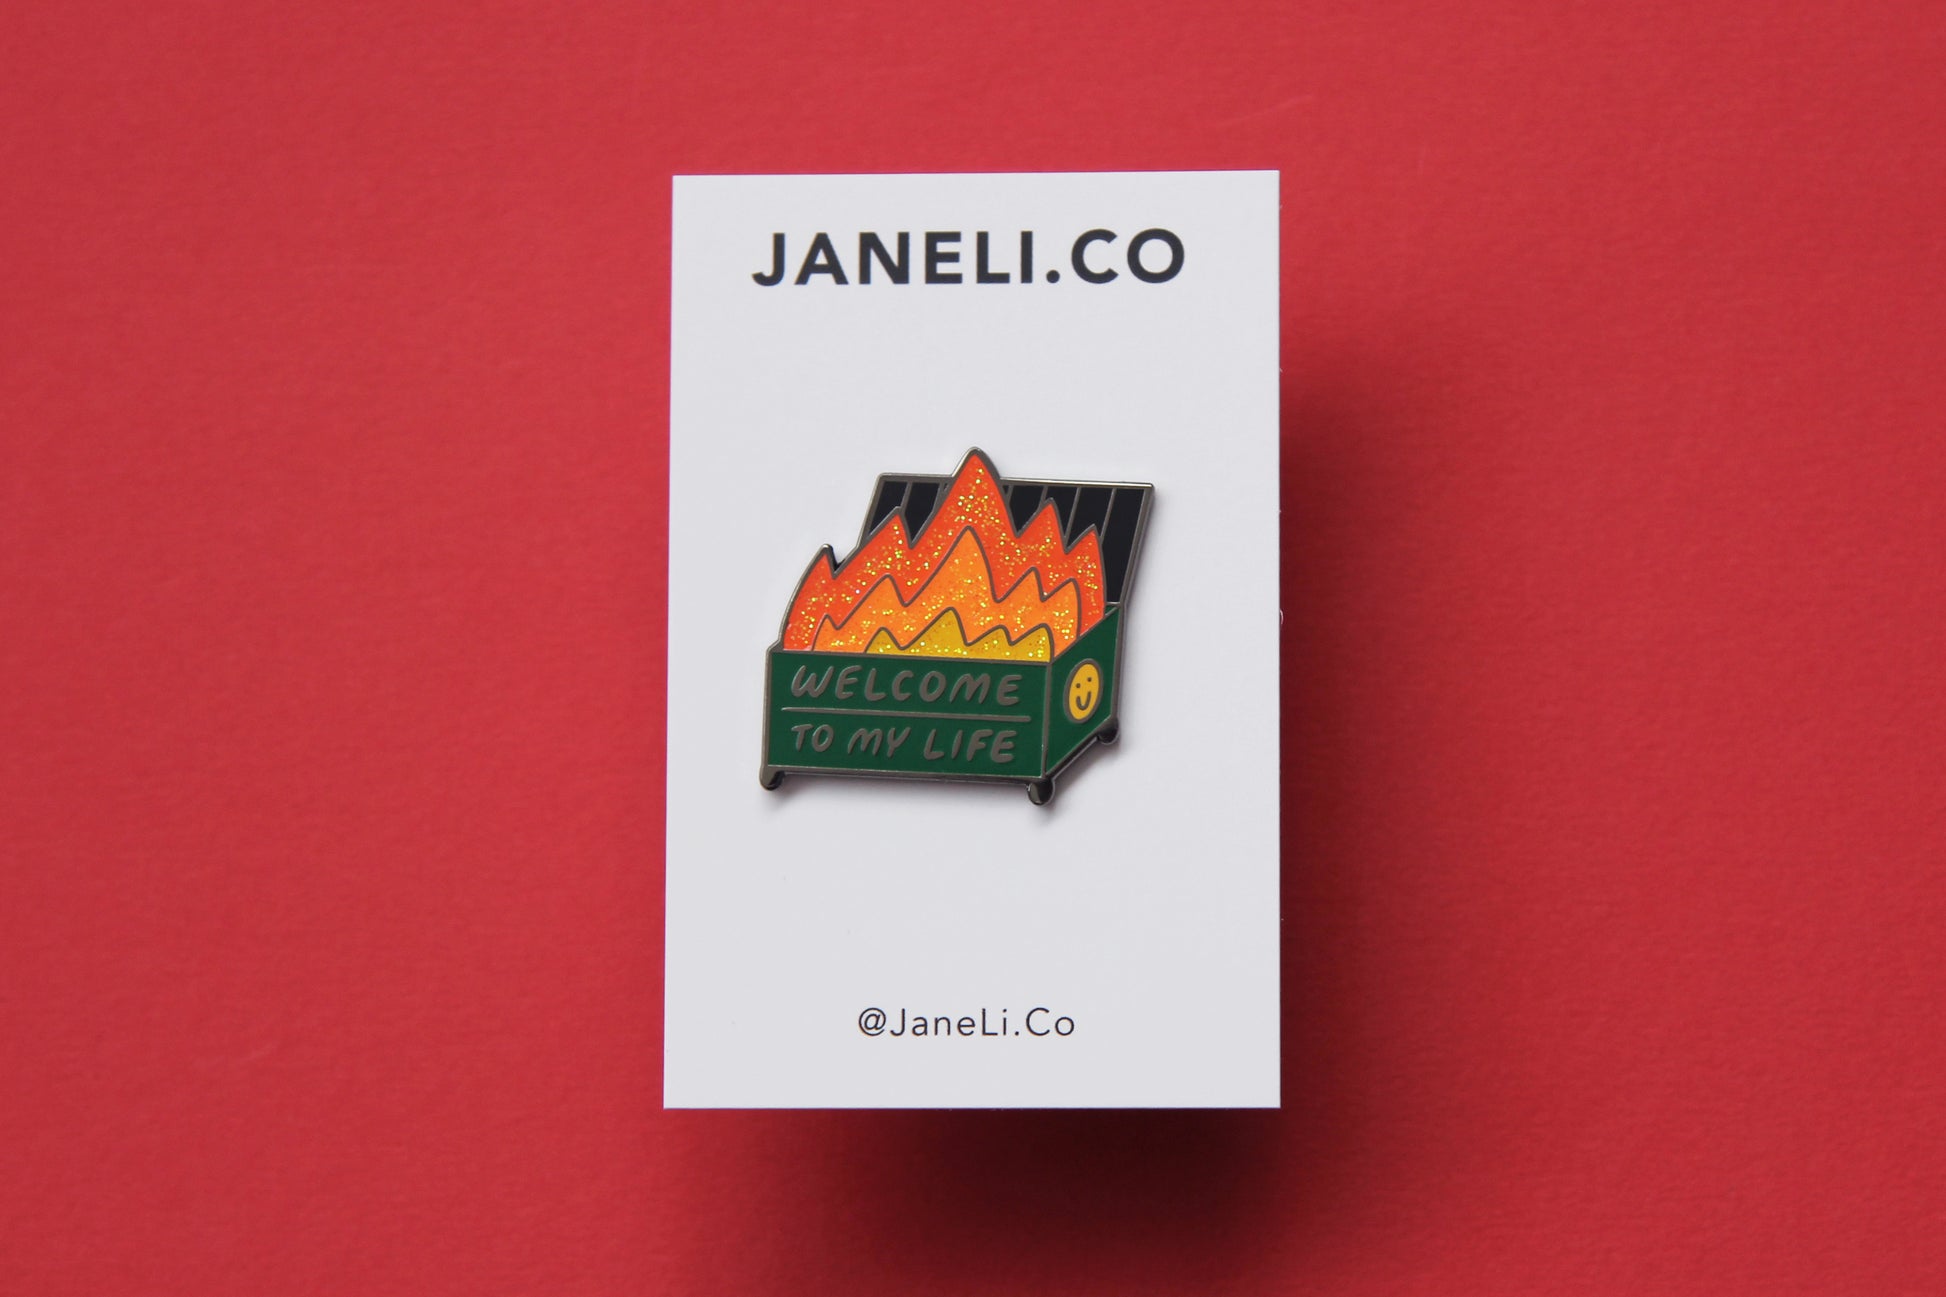 An enamel pin showing a dumpster with glittery flames that says "Welcome to my life" on a white JaneLi.Co backing card over a red background.